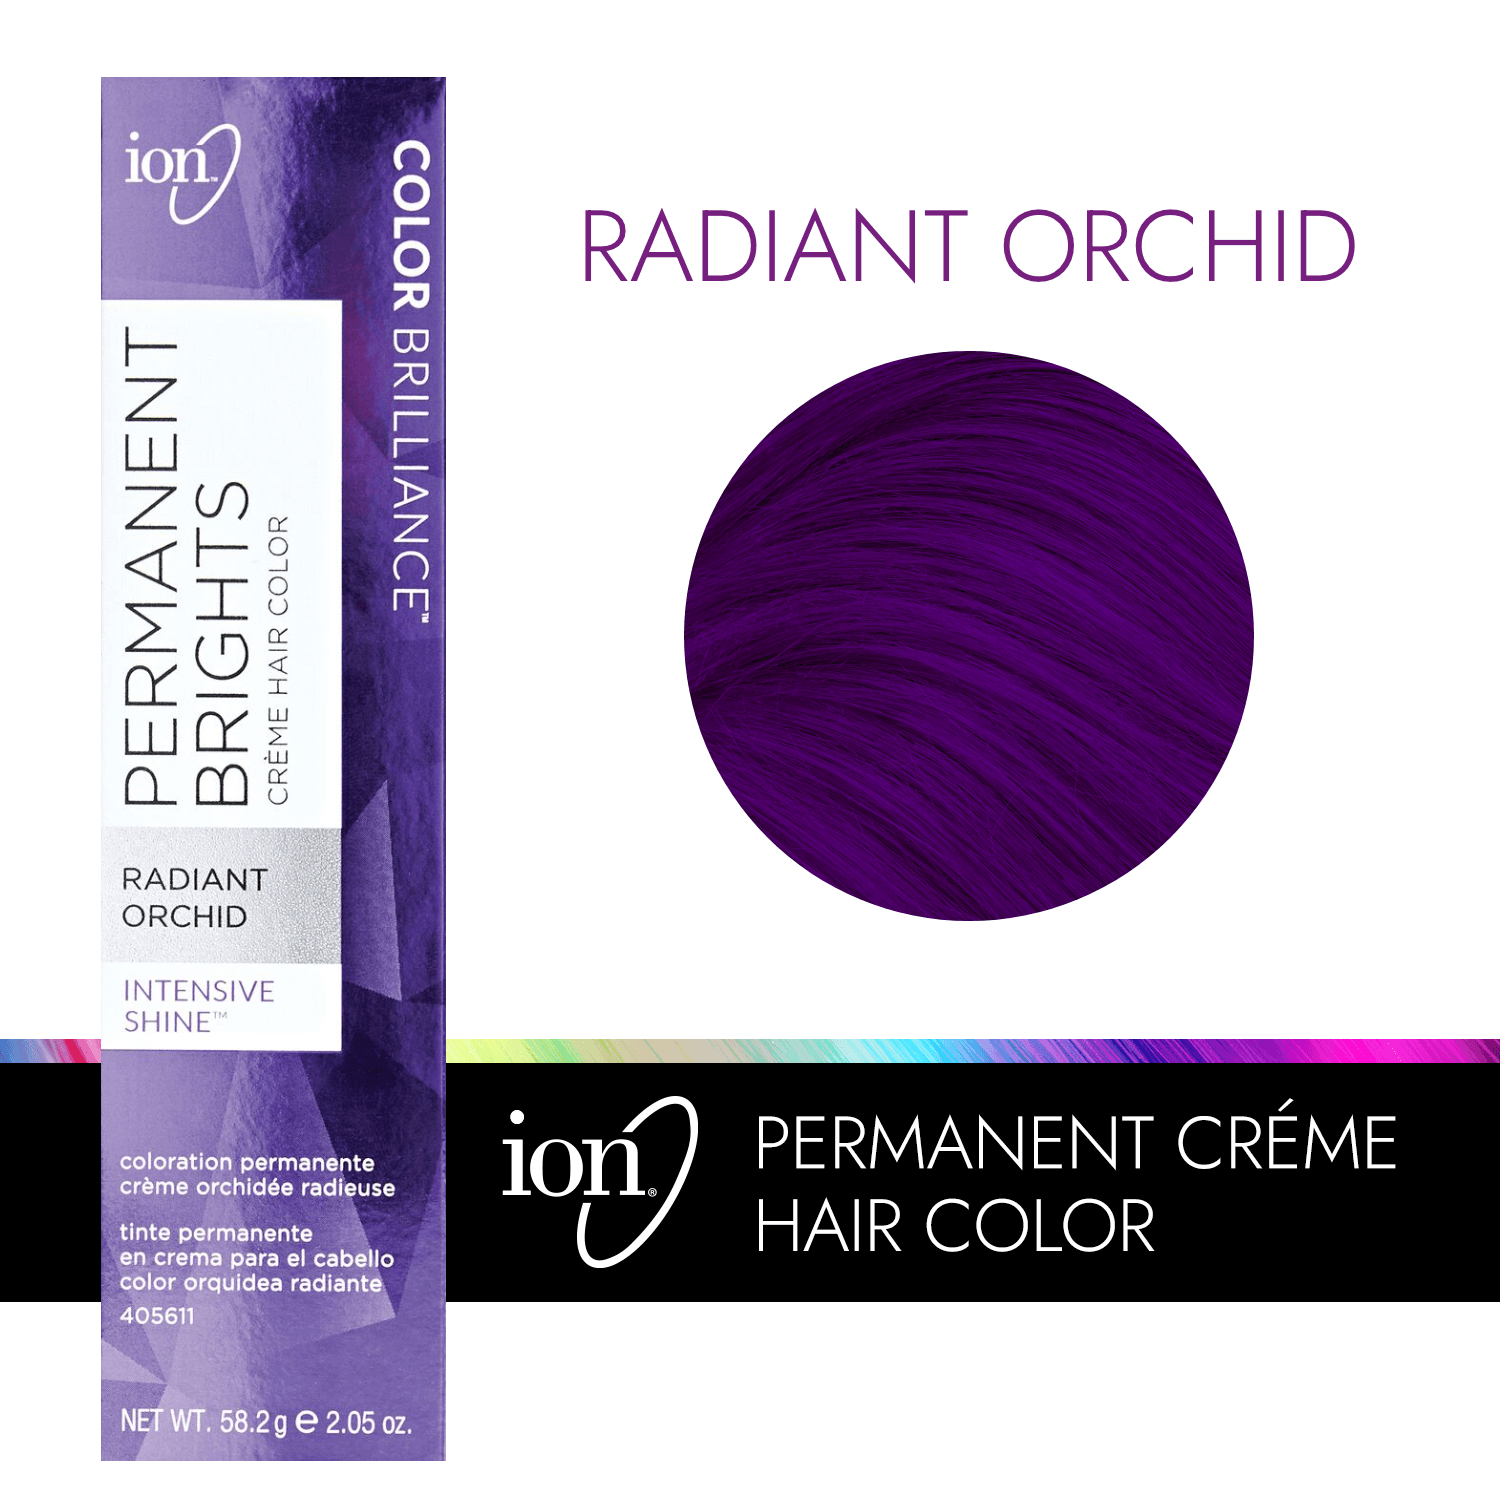 radiant orchid ion